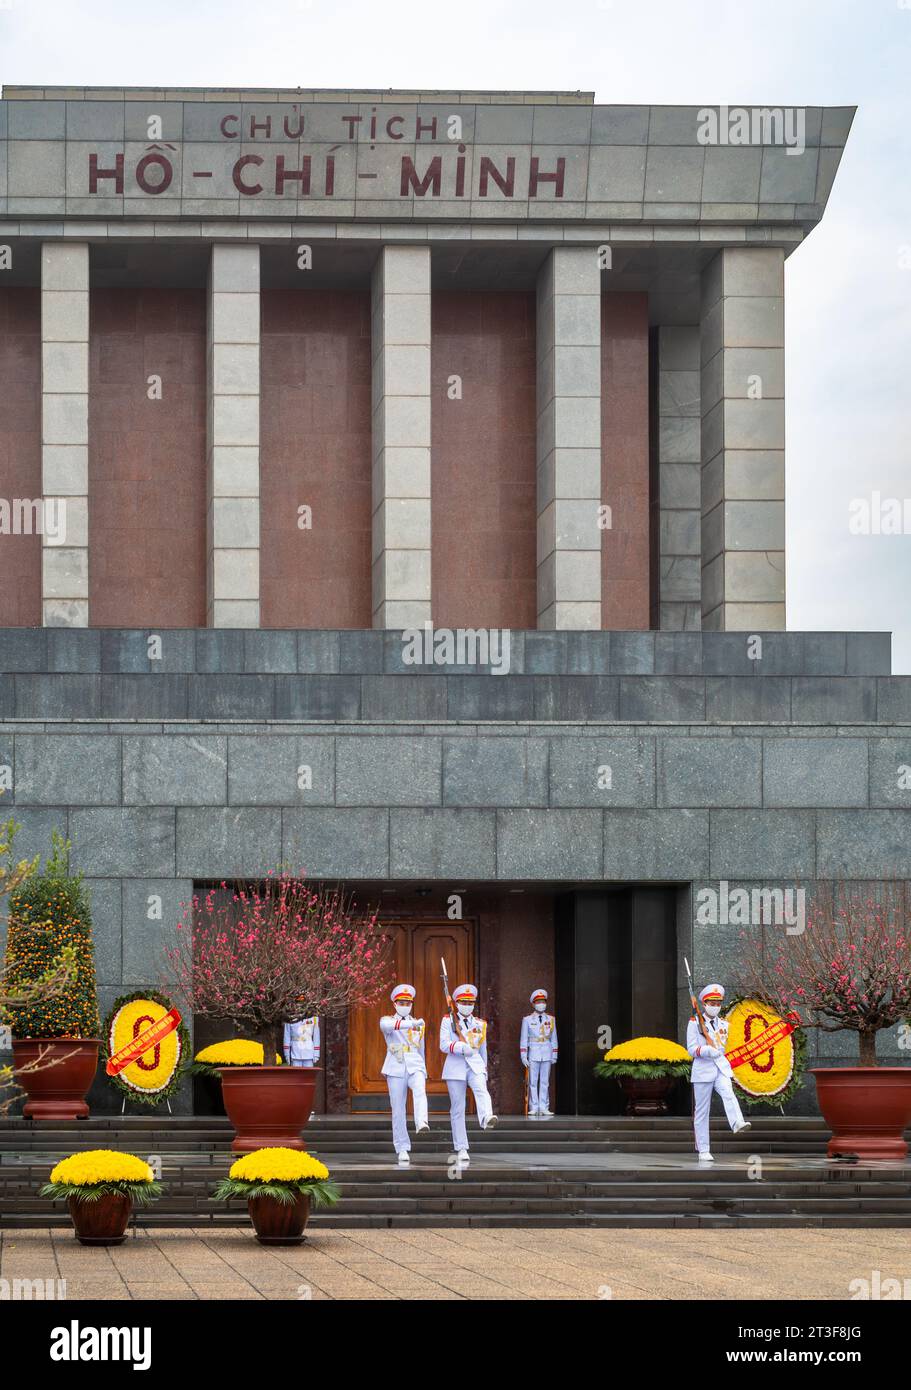 White-uniformed soldiers march and goose step at the Changing of the Guard at the Ho Chi Minh Mausoleum, Hanoi, Vietnam. Stock Photo